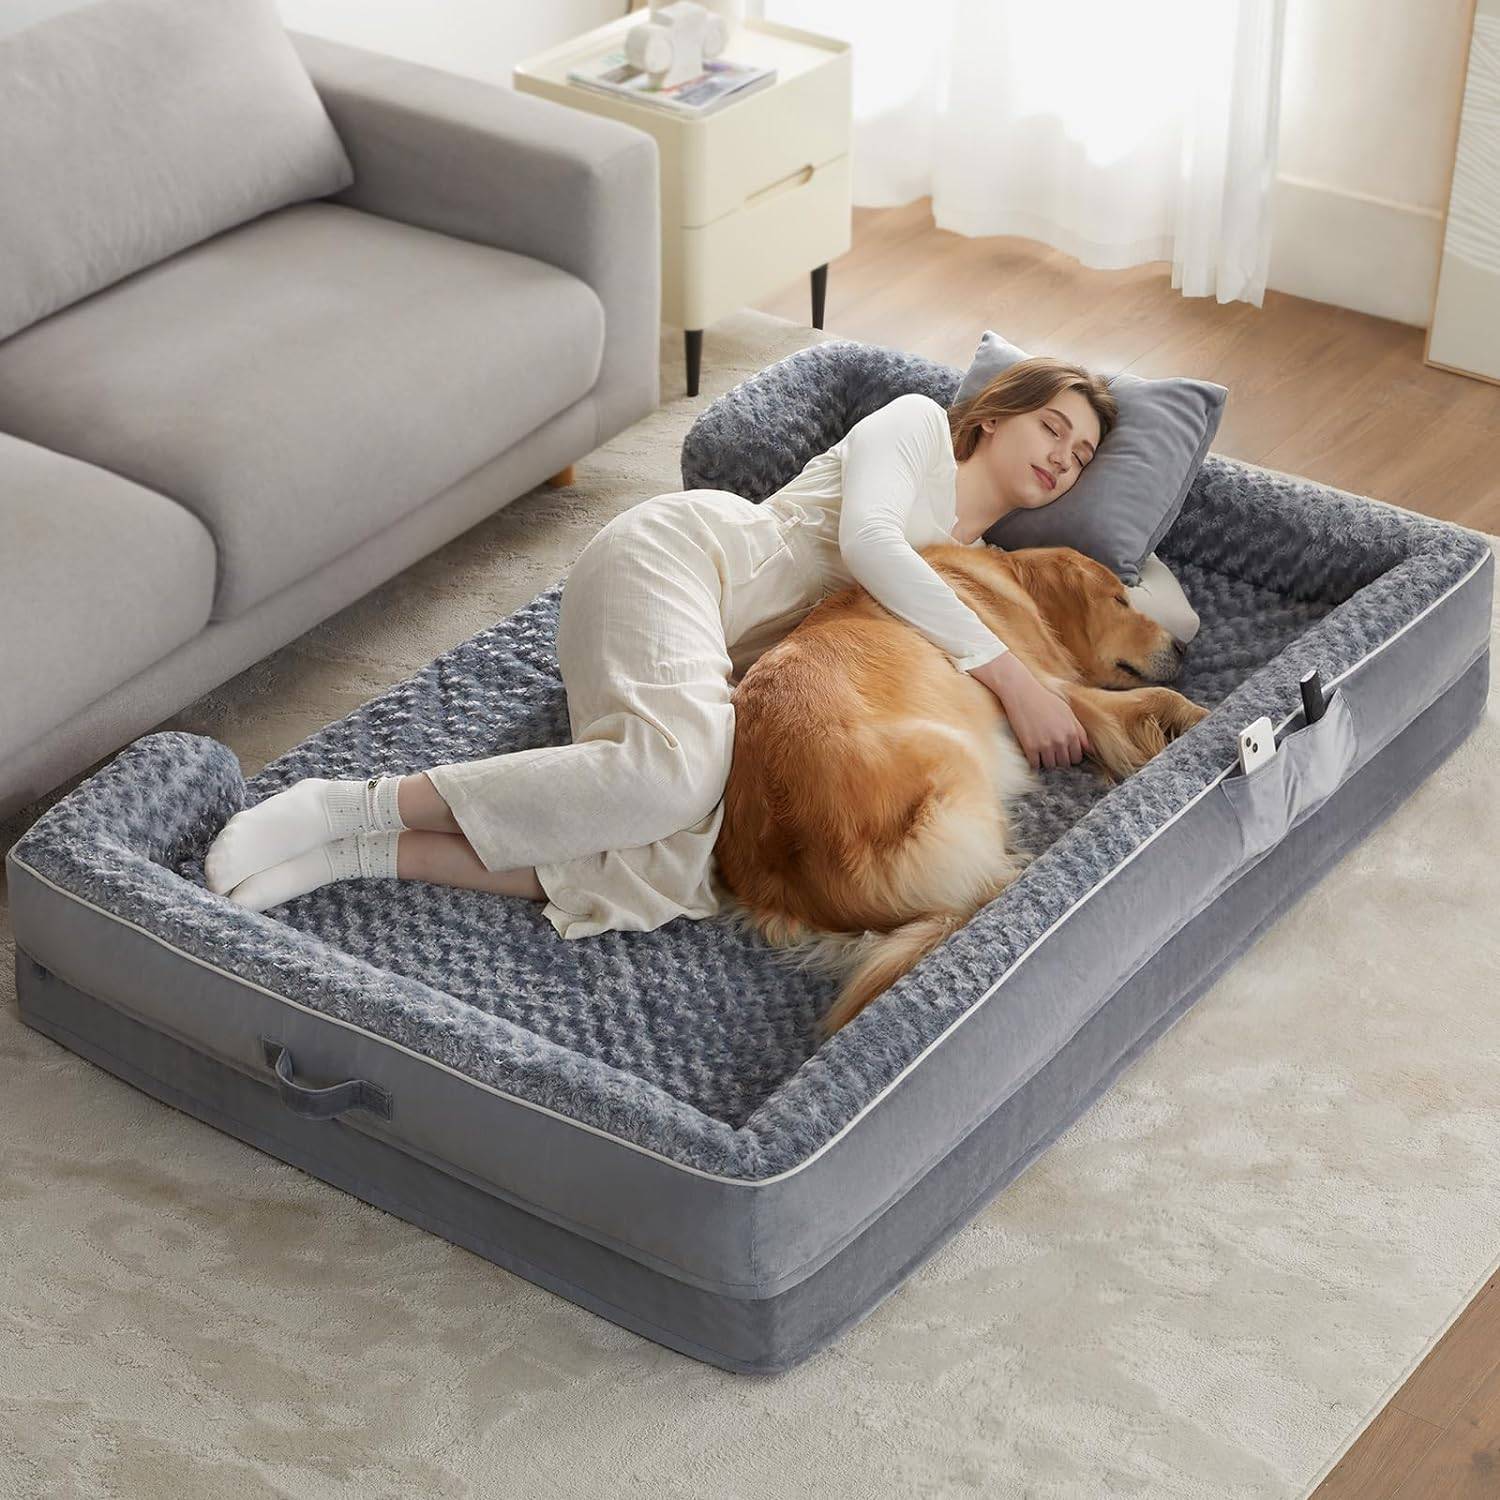 human dog bed with woman and golden retriever sleeping in it